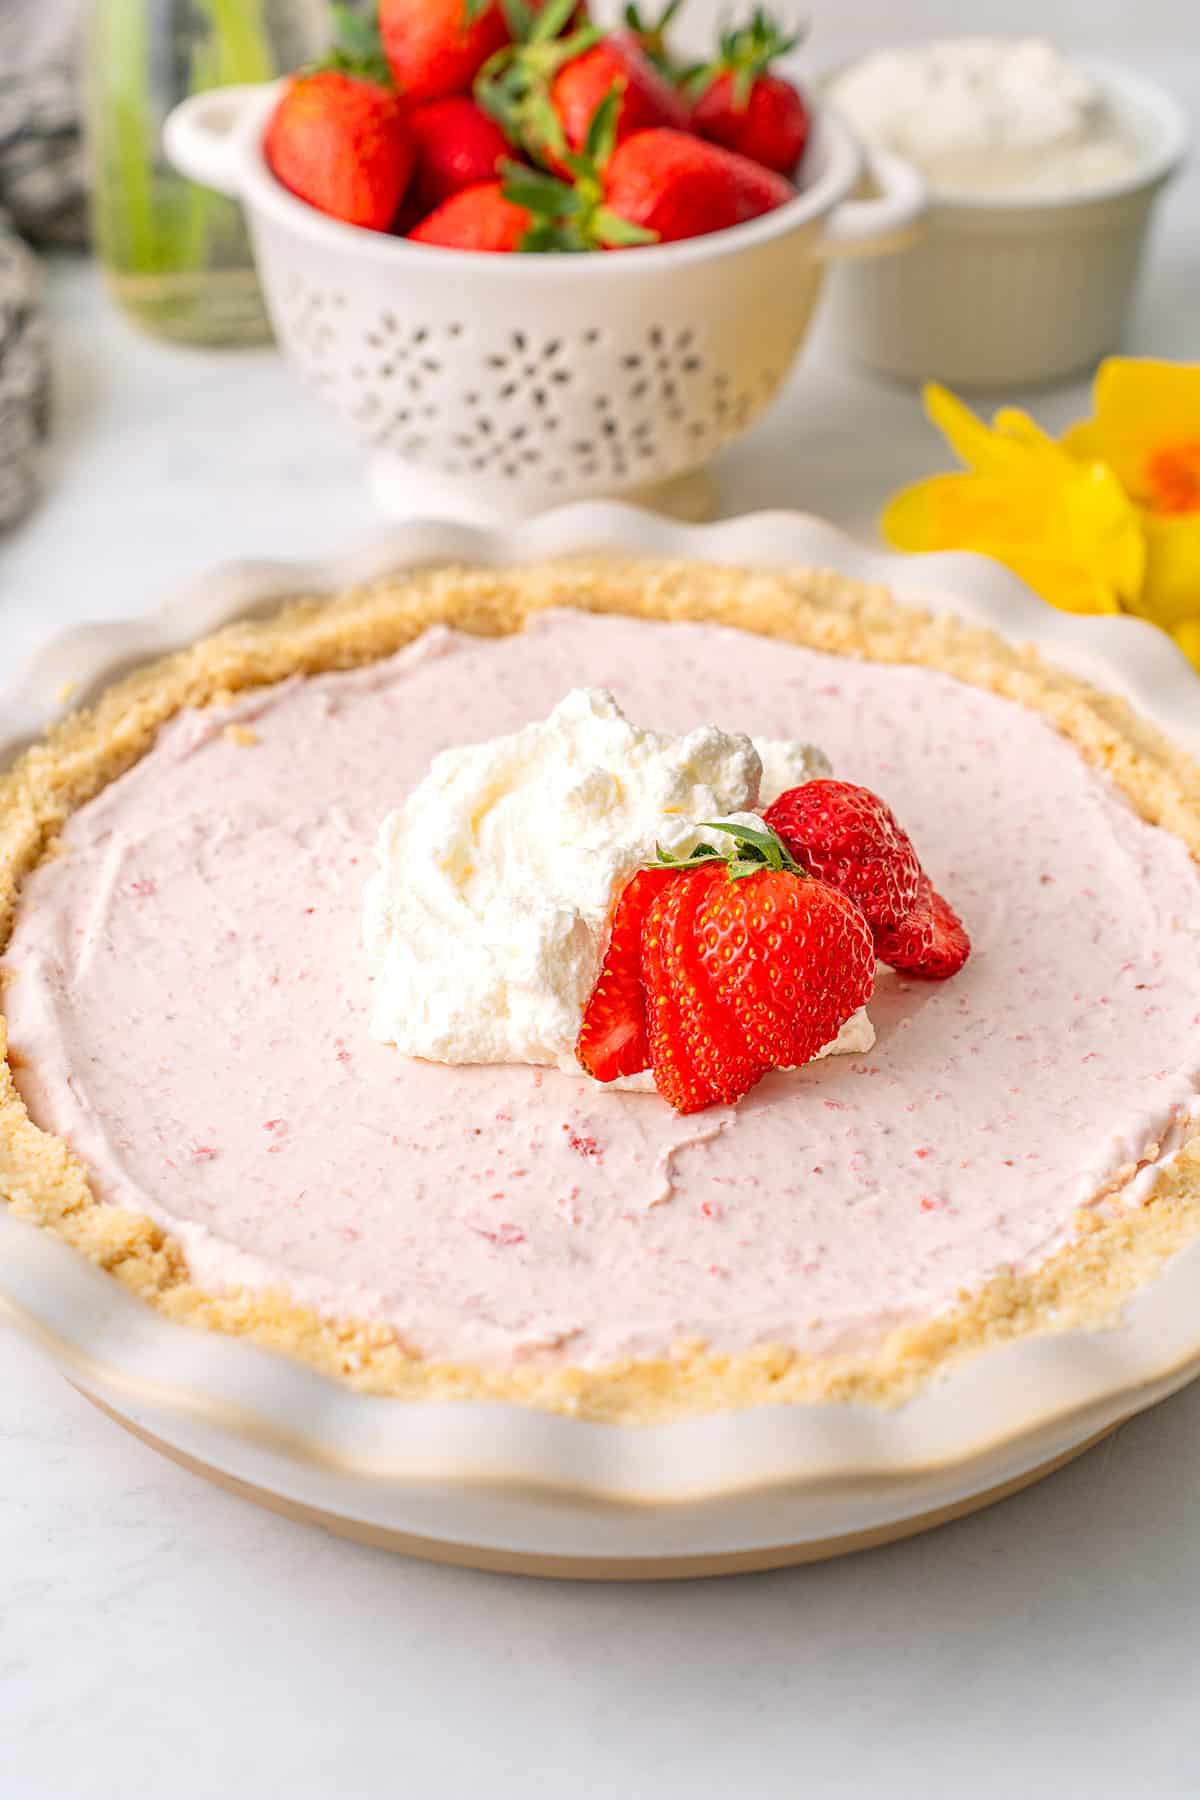 Keto Strawberry Cream Pie in a white pie plate in front of a colander of fresh berries.